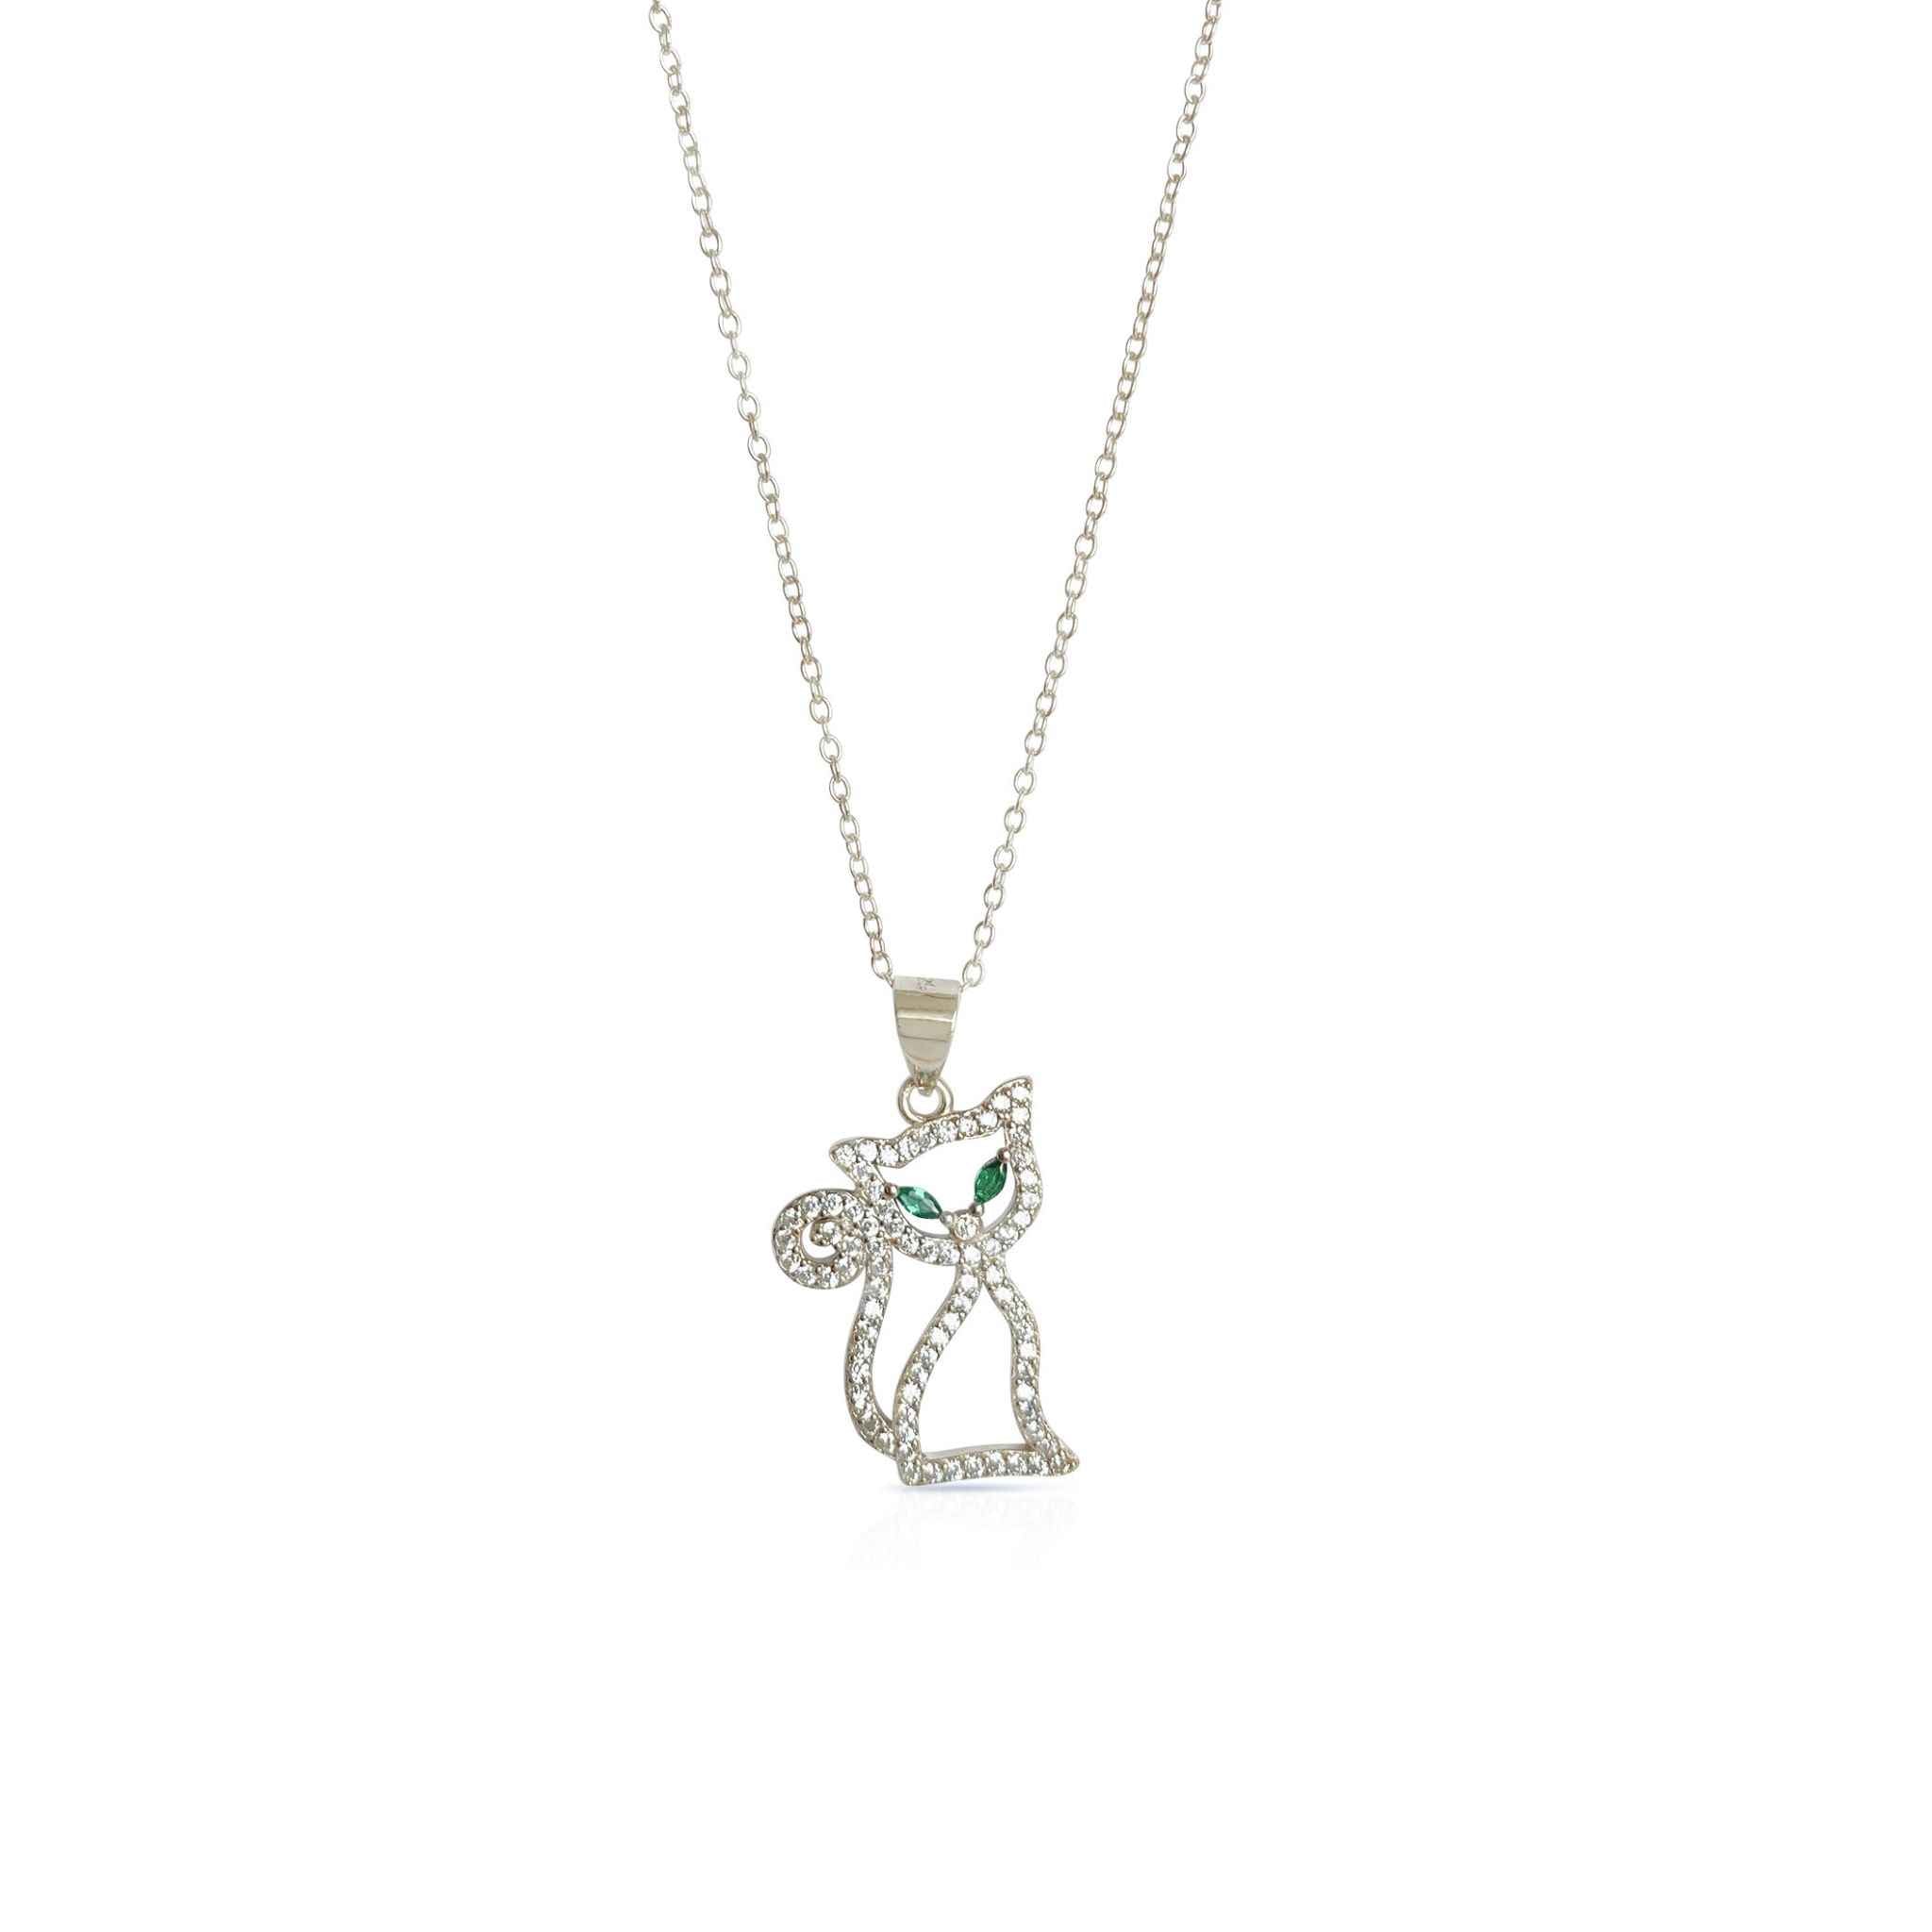 Fashionable cat pendant necklace, featuring bright zircons and captivating green eyes, a perfect accessory for feline enthusiasts.